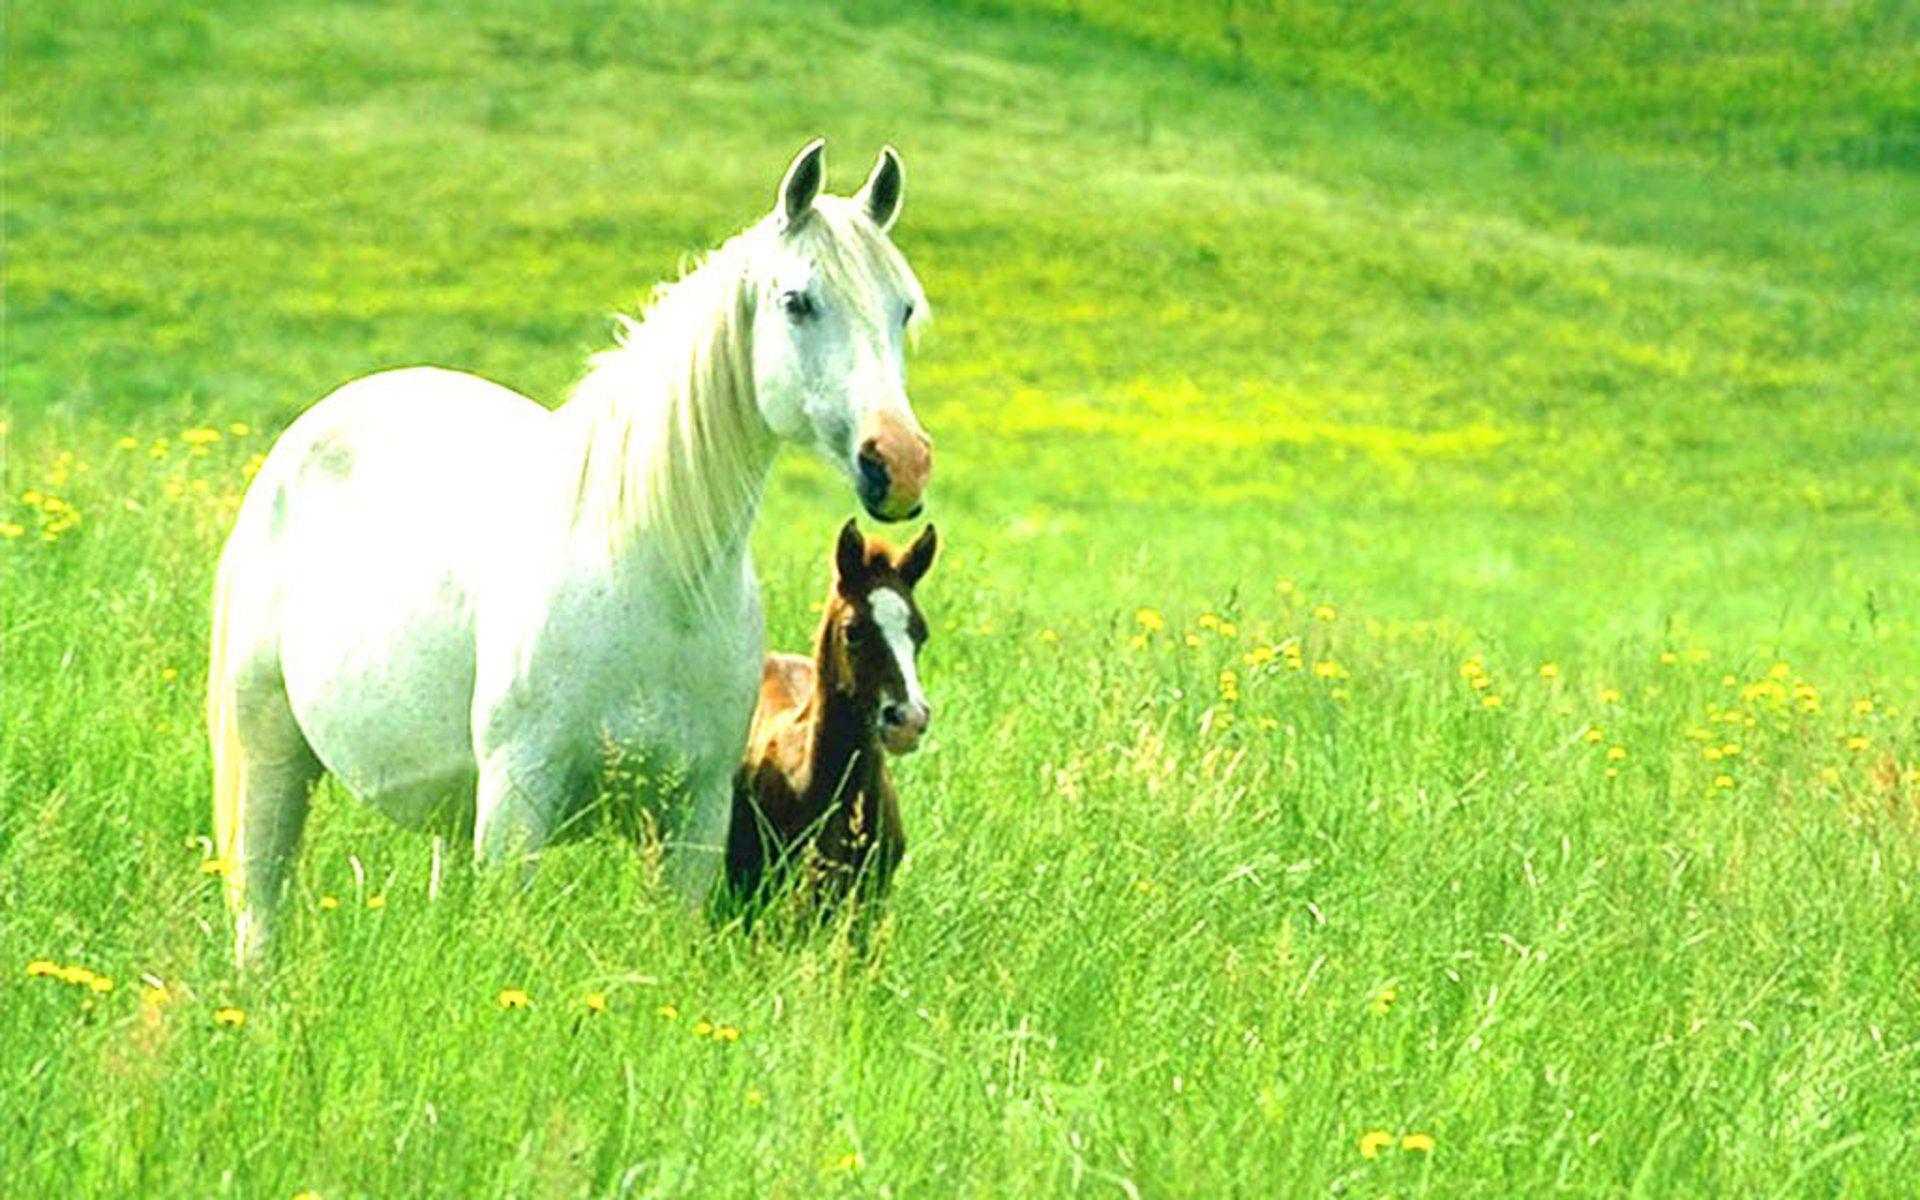 Green green grass of home. All About Horses. Horse